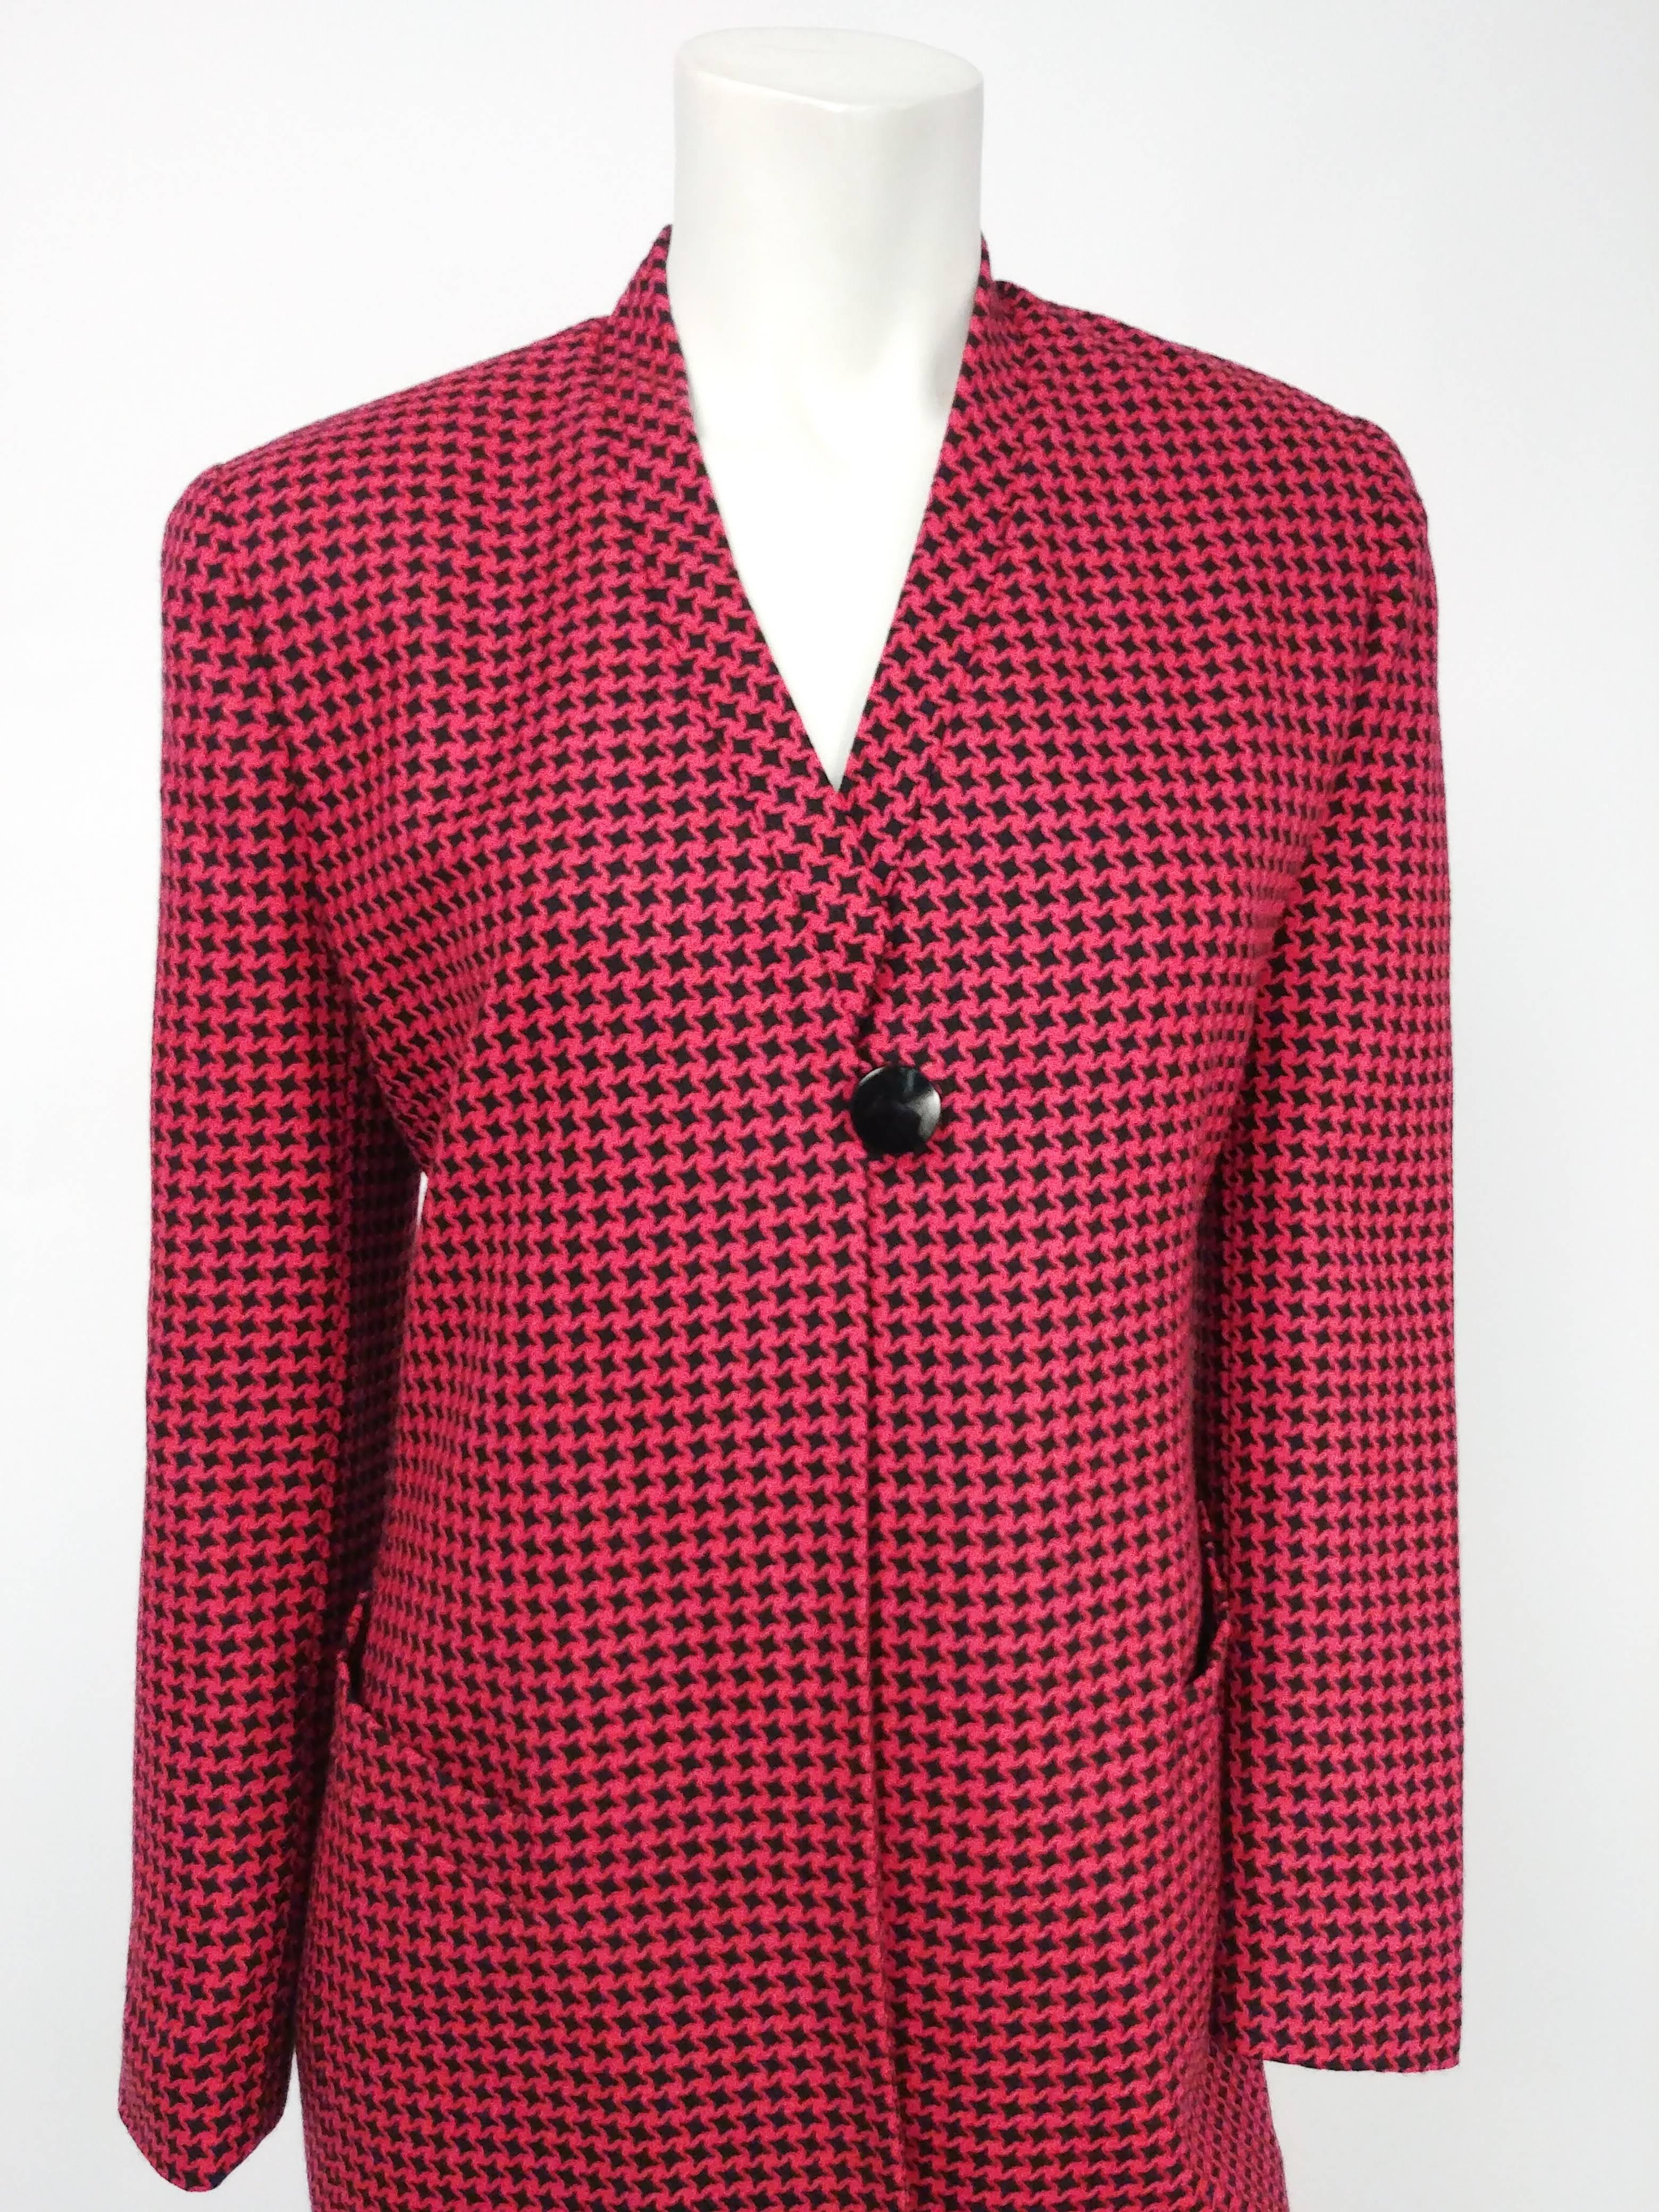 1980s Christian Dior Suit - 5 For Sale on 1stDibs | 1980s suits 